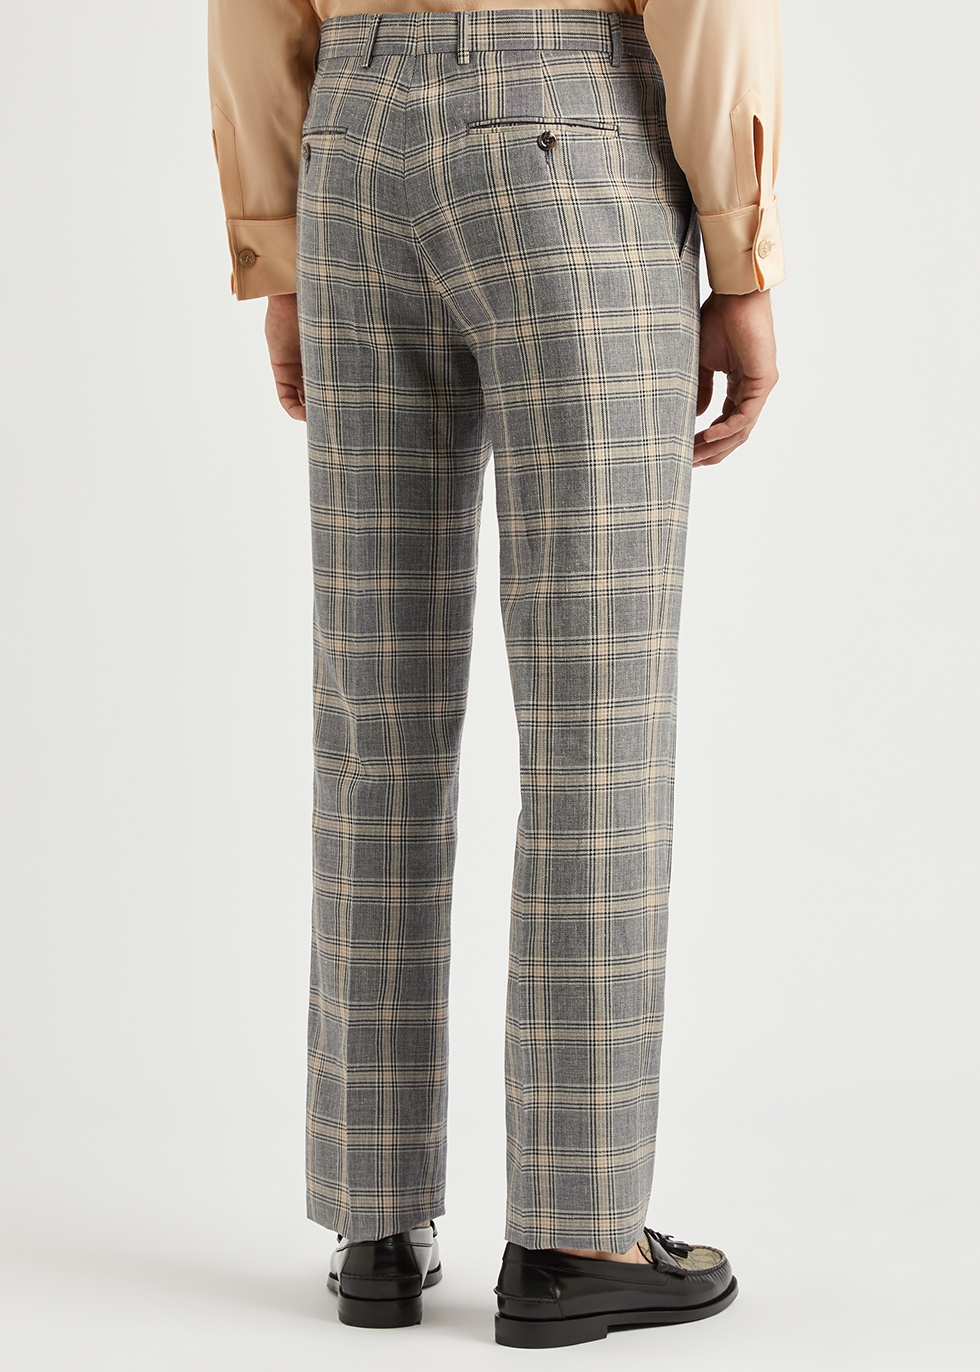 Gucci Checked trousers  Mens Clothing  Vitkac